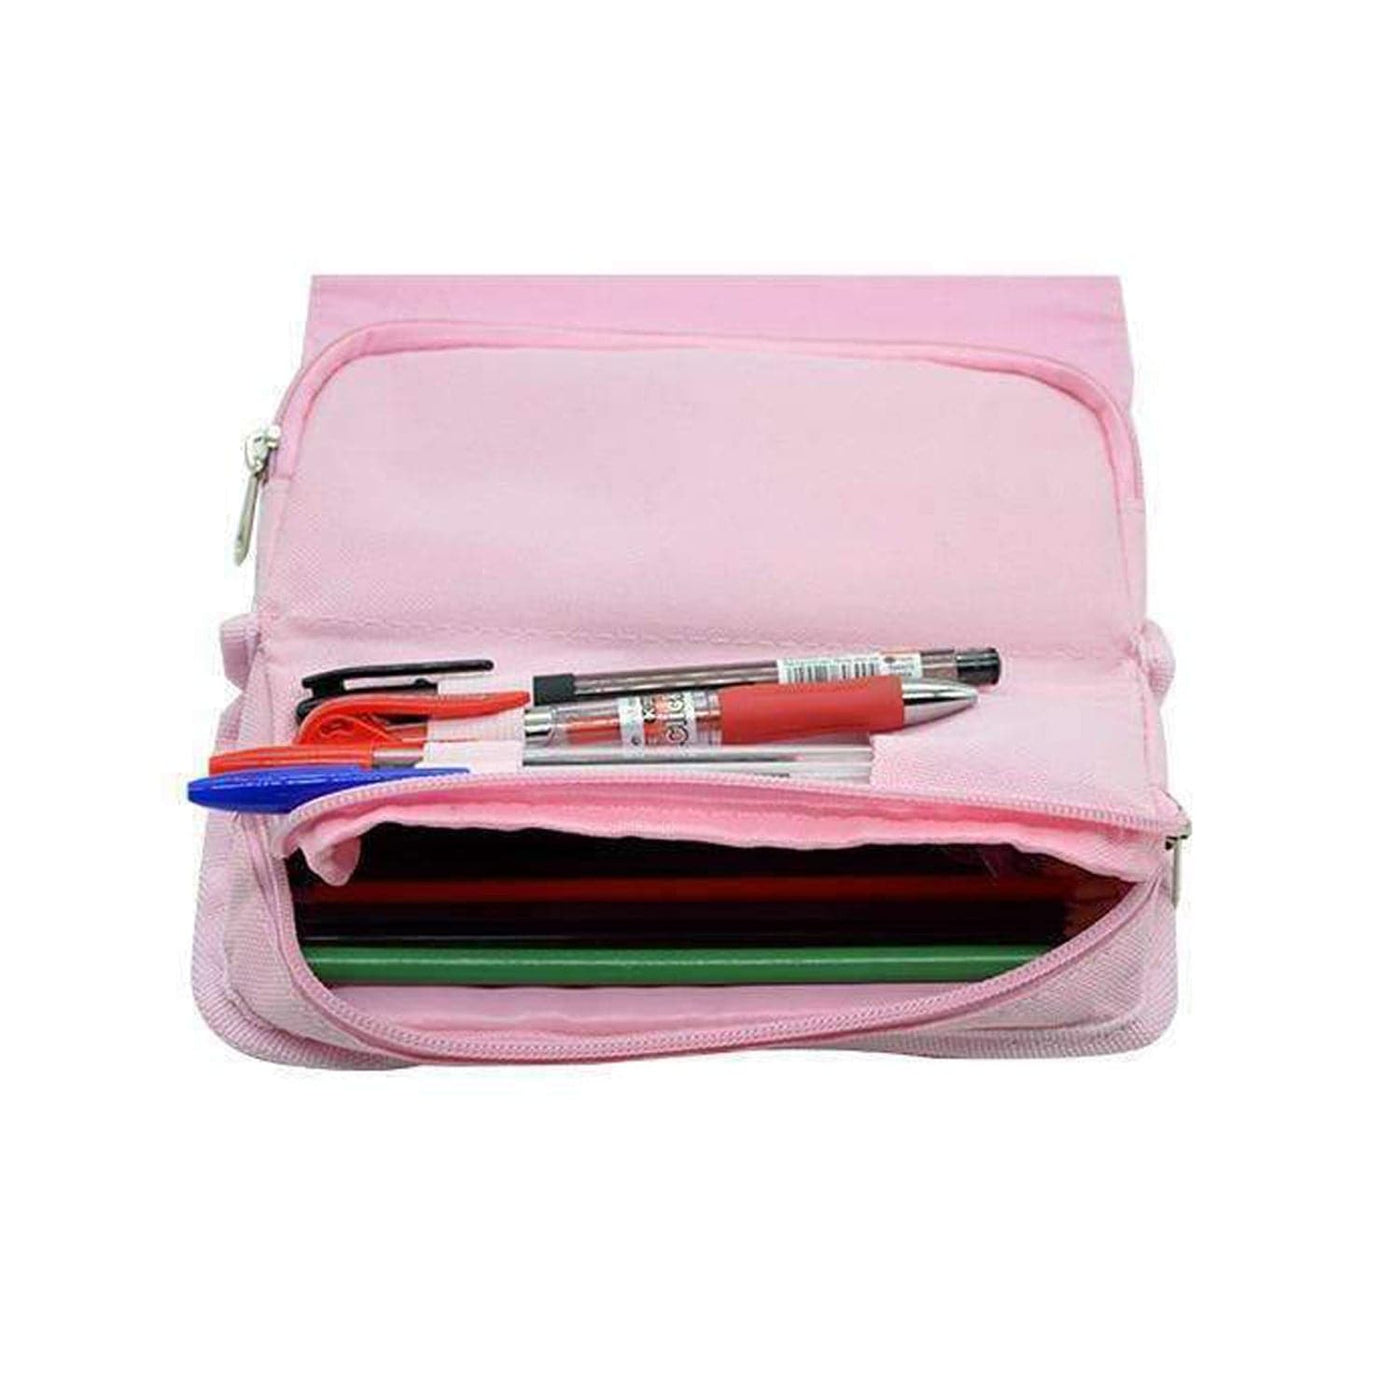 Name And Occupation - Doctor Who Pencil Case